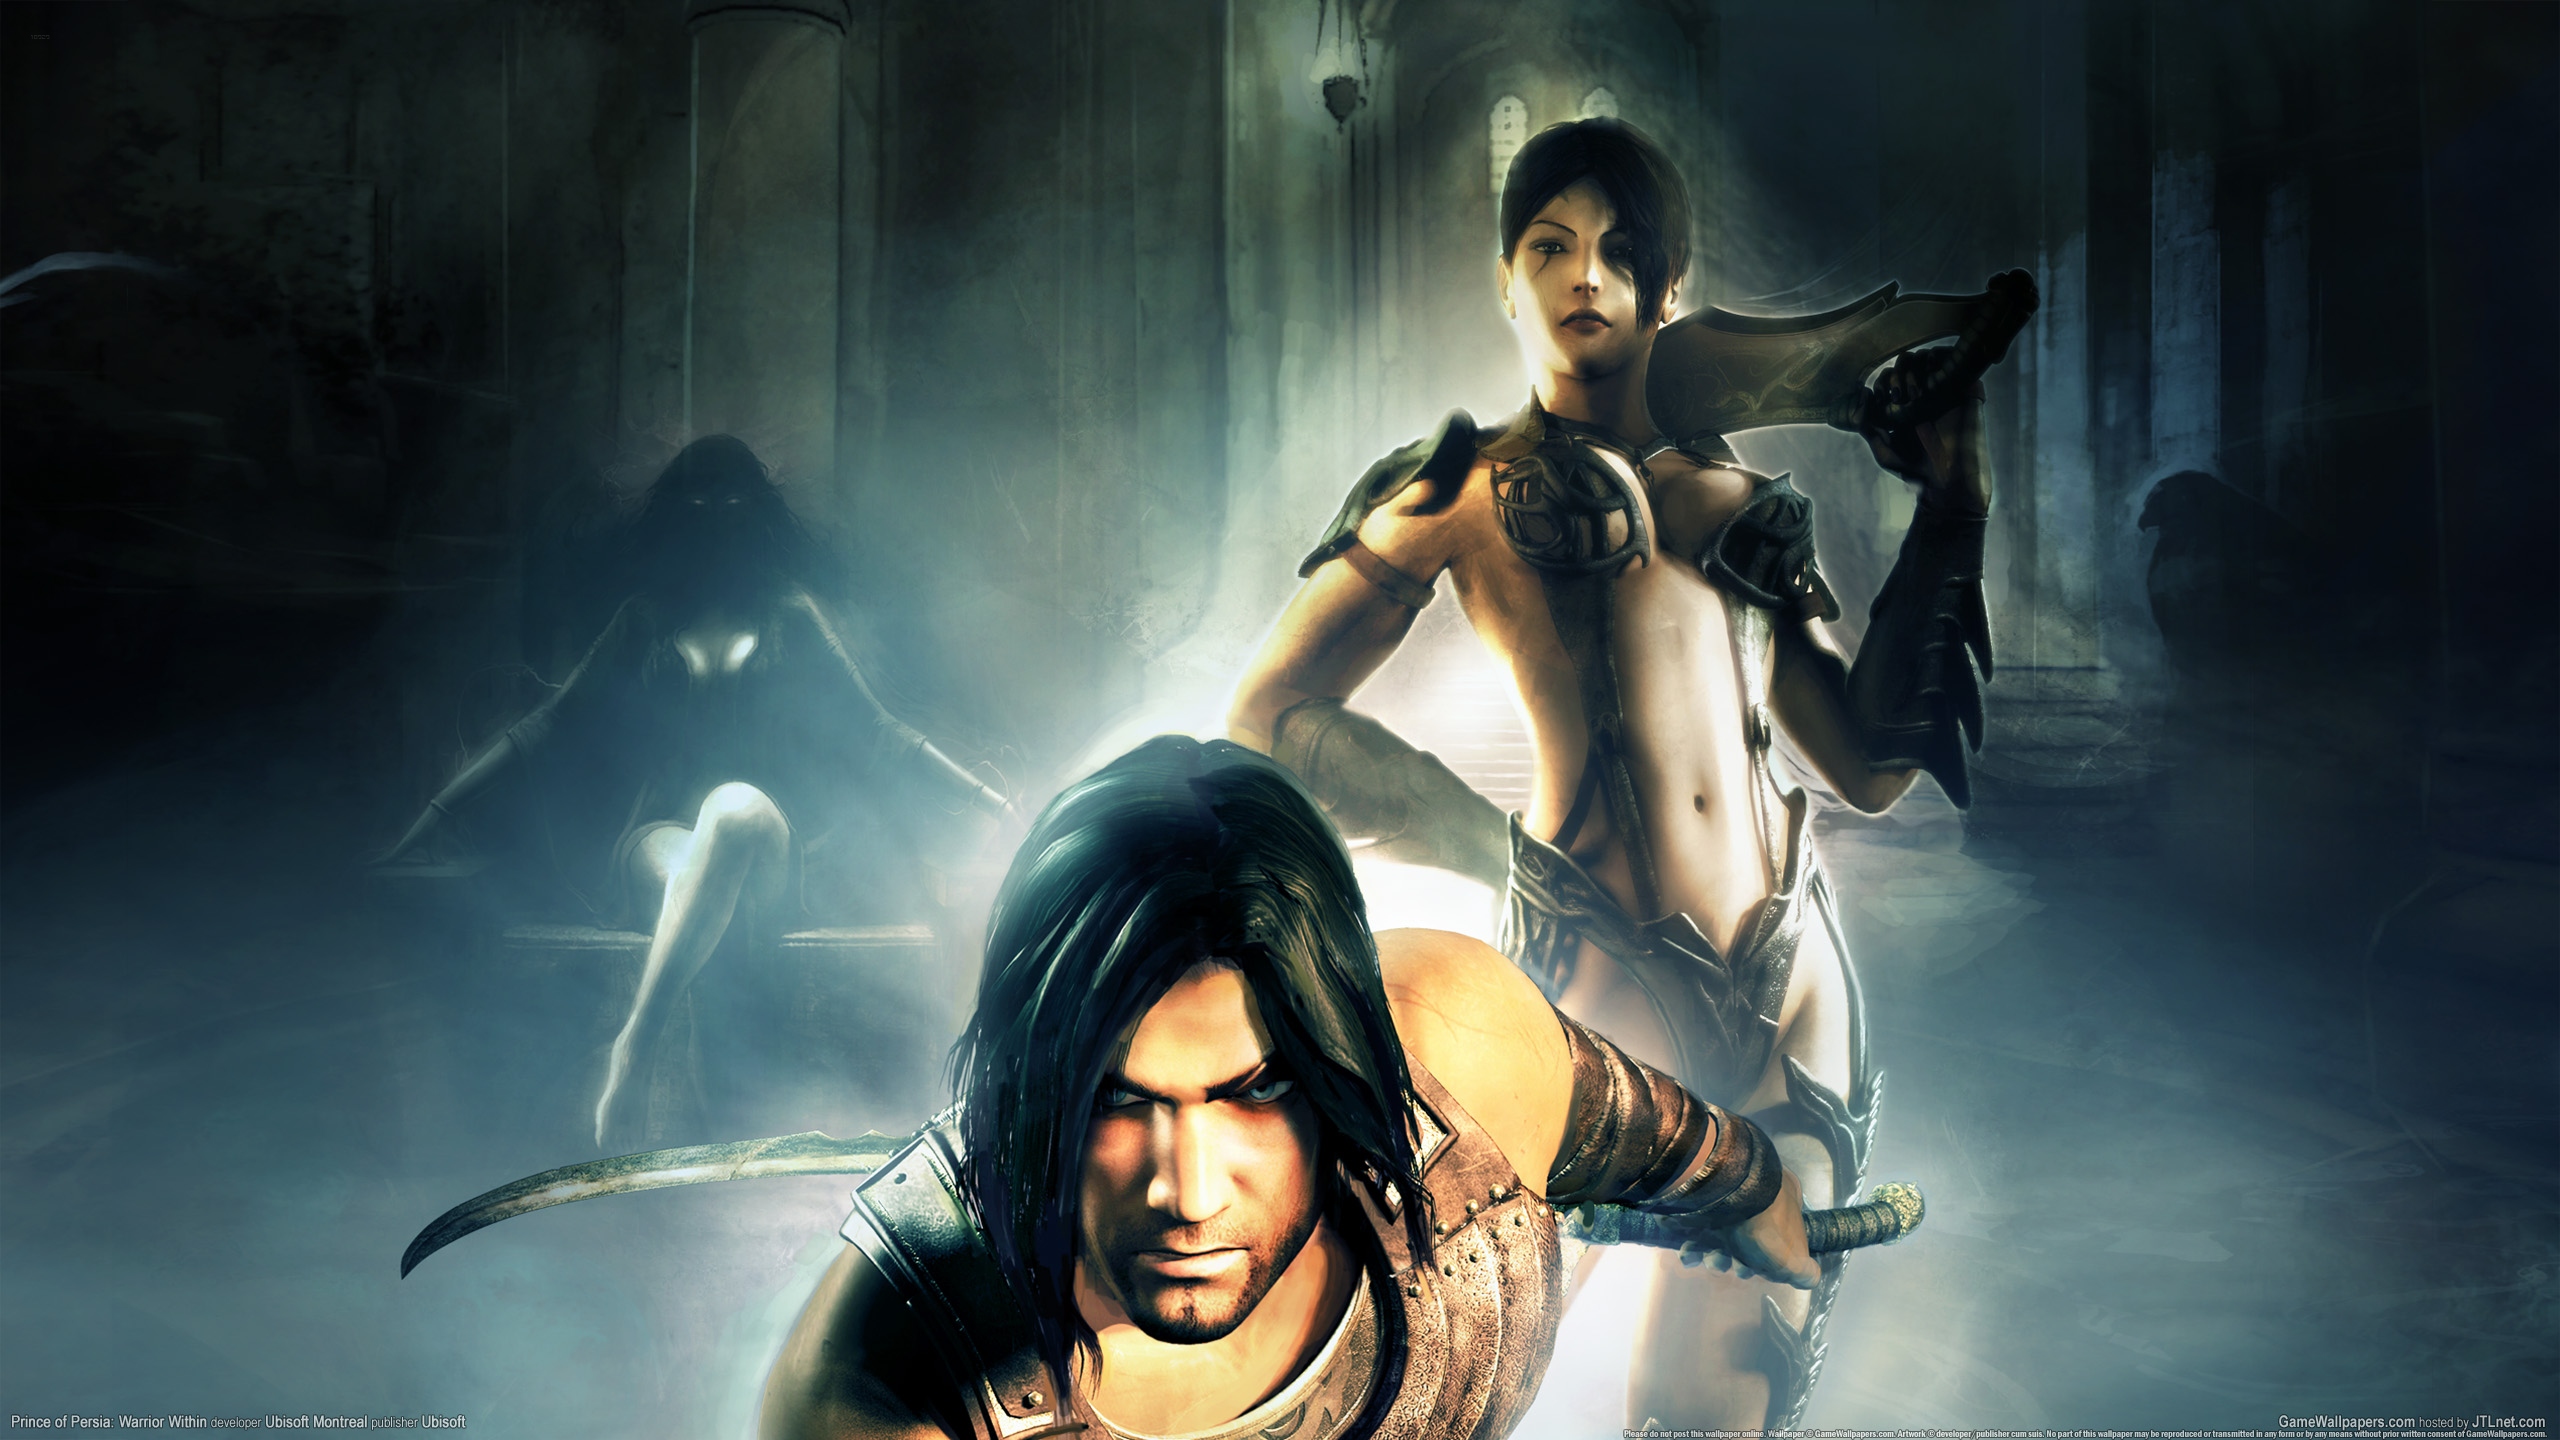 Prince of Persia: Warrior Within 2560x1440 achtergrond 19